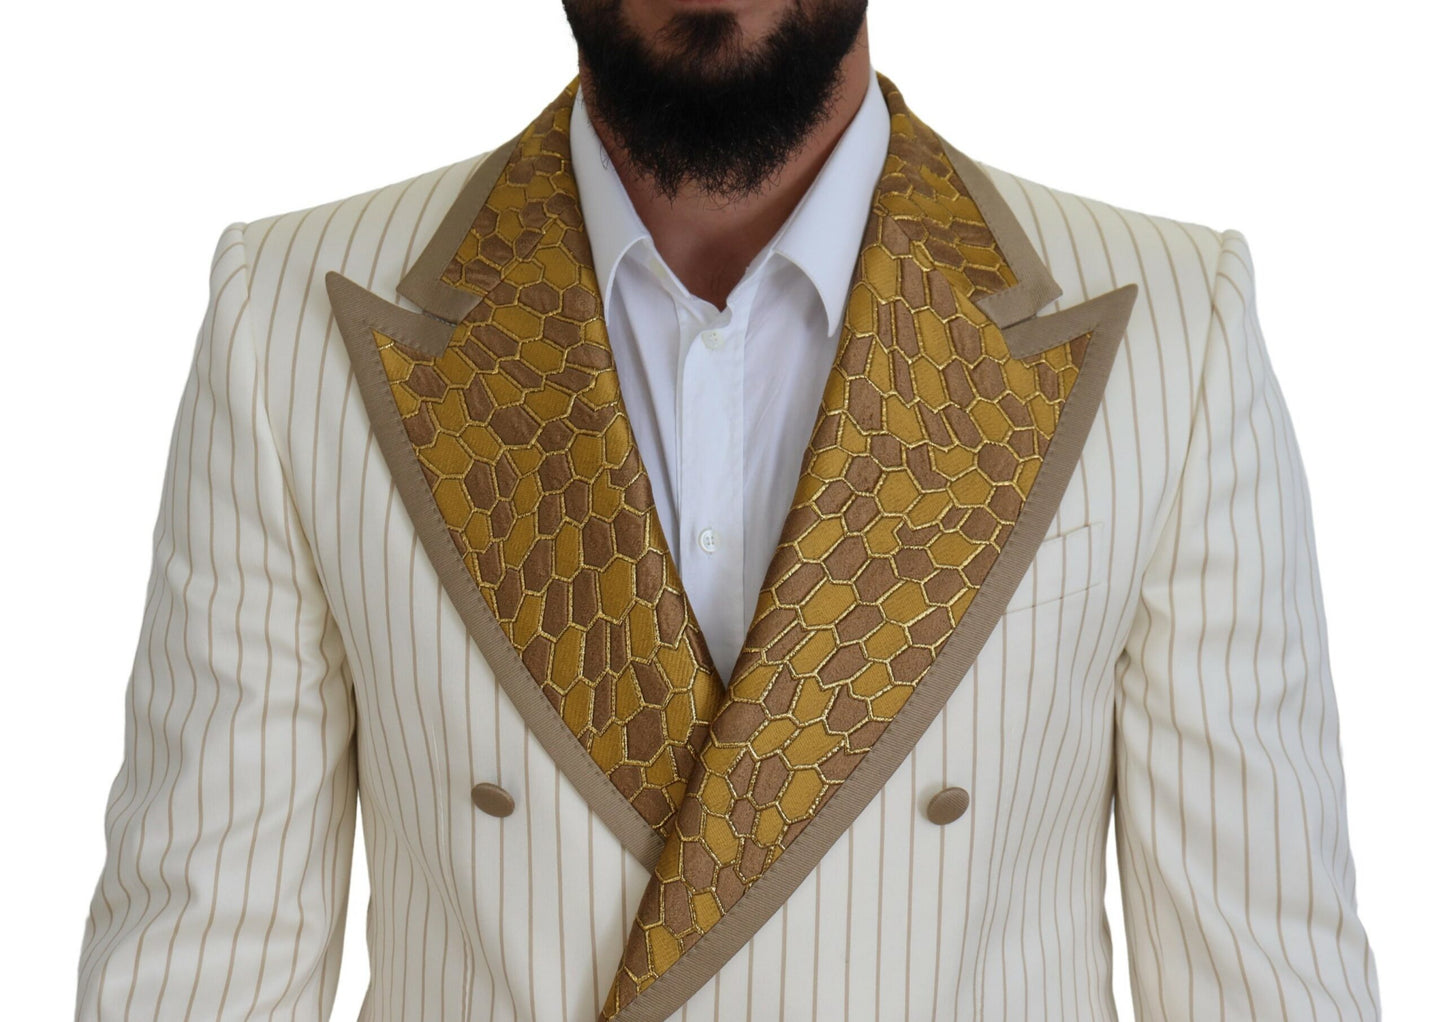 Elegant Off White Double Breasted Suit